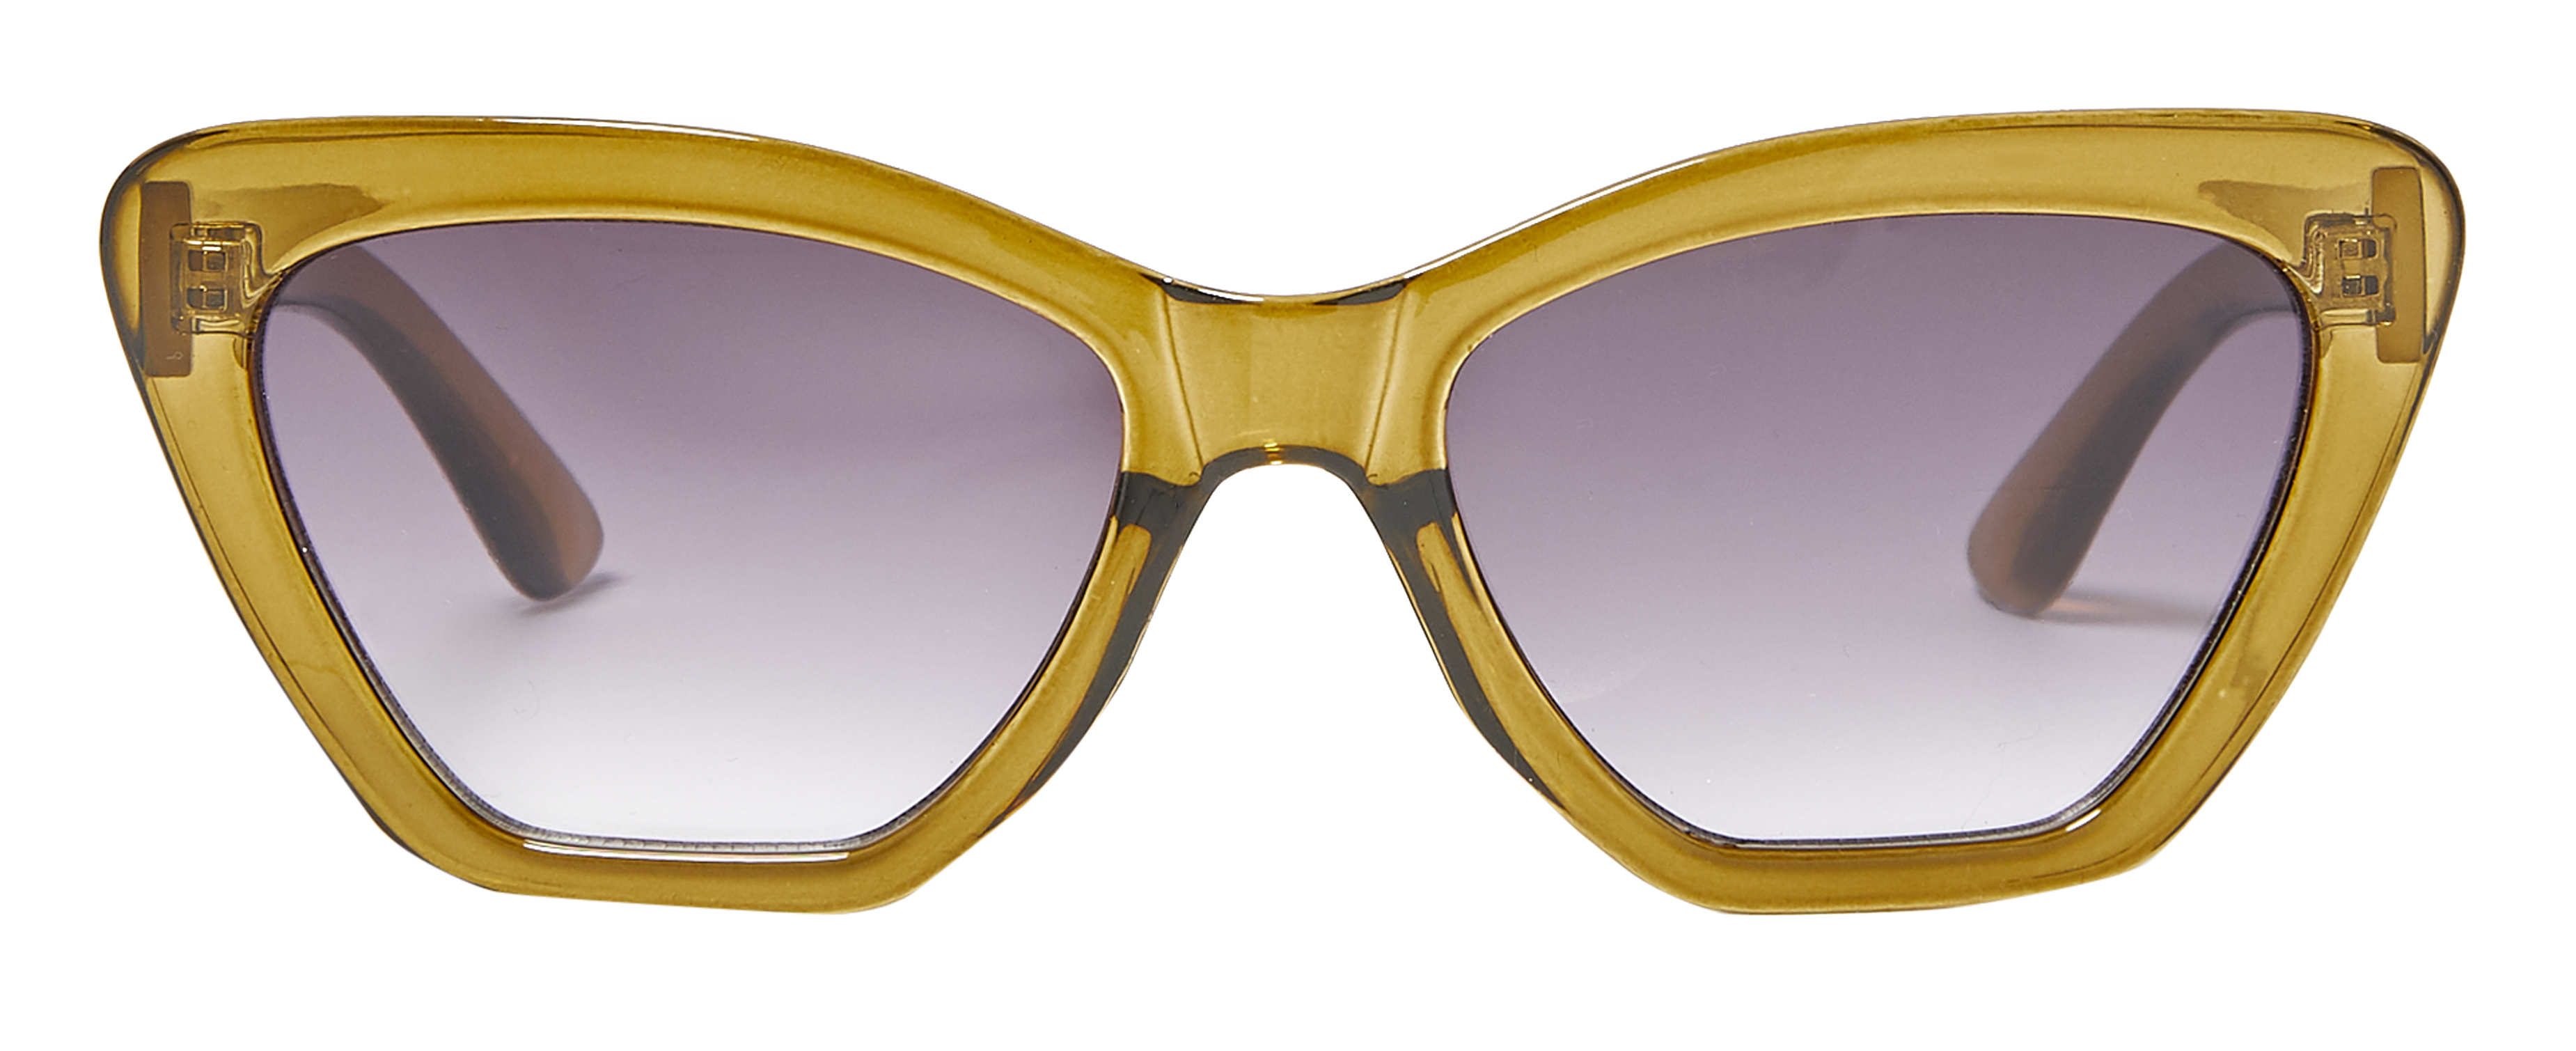 5 of the best cat eye sunglasses for every face shape